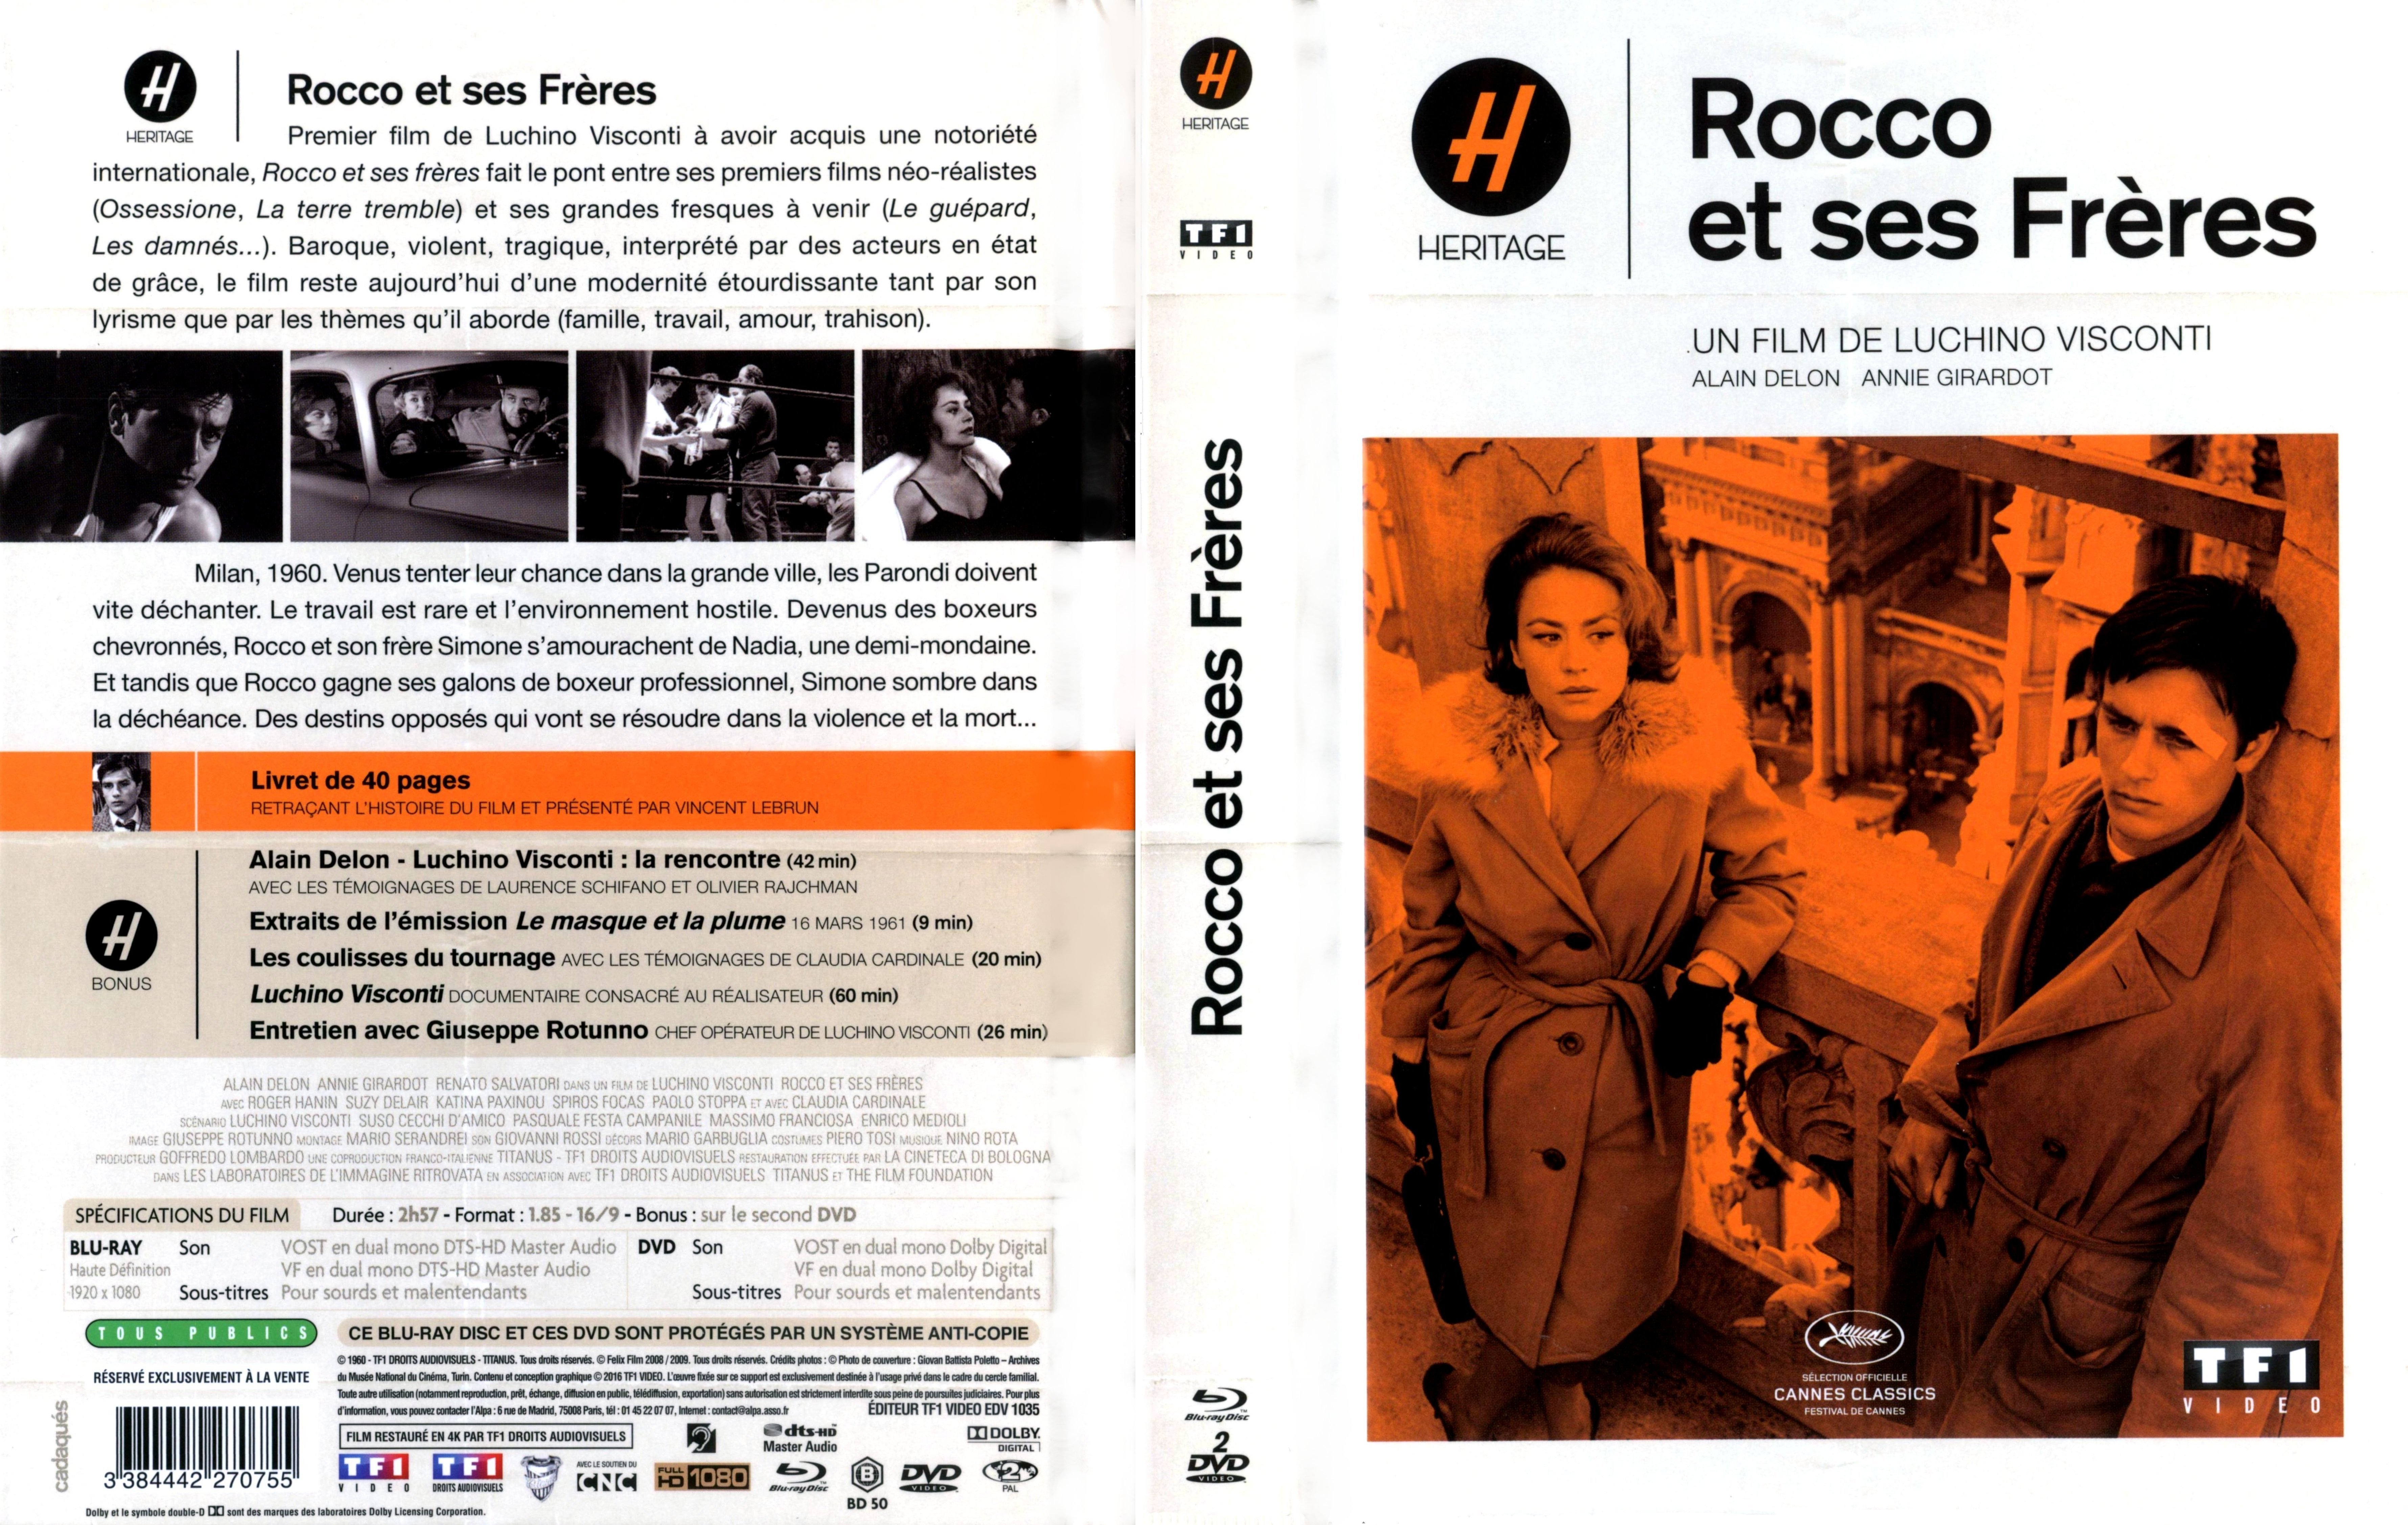 Jaquette DVD Rocco et ses frres (BLU-RAY)